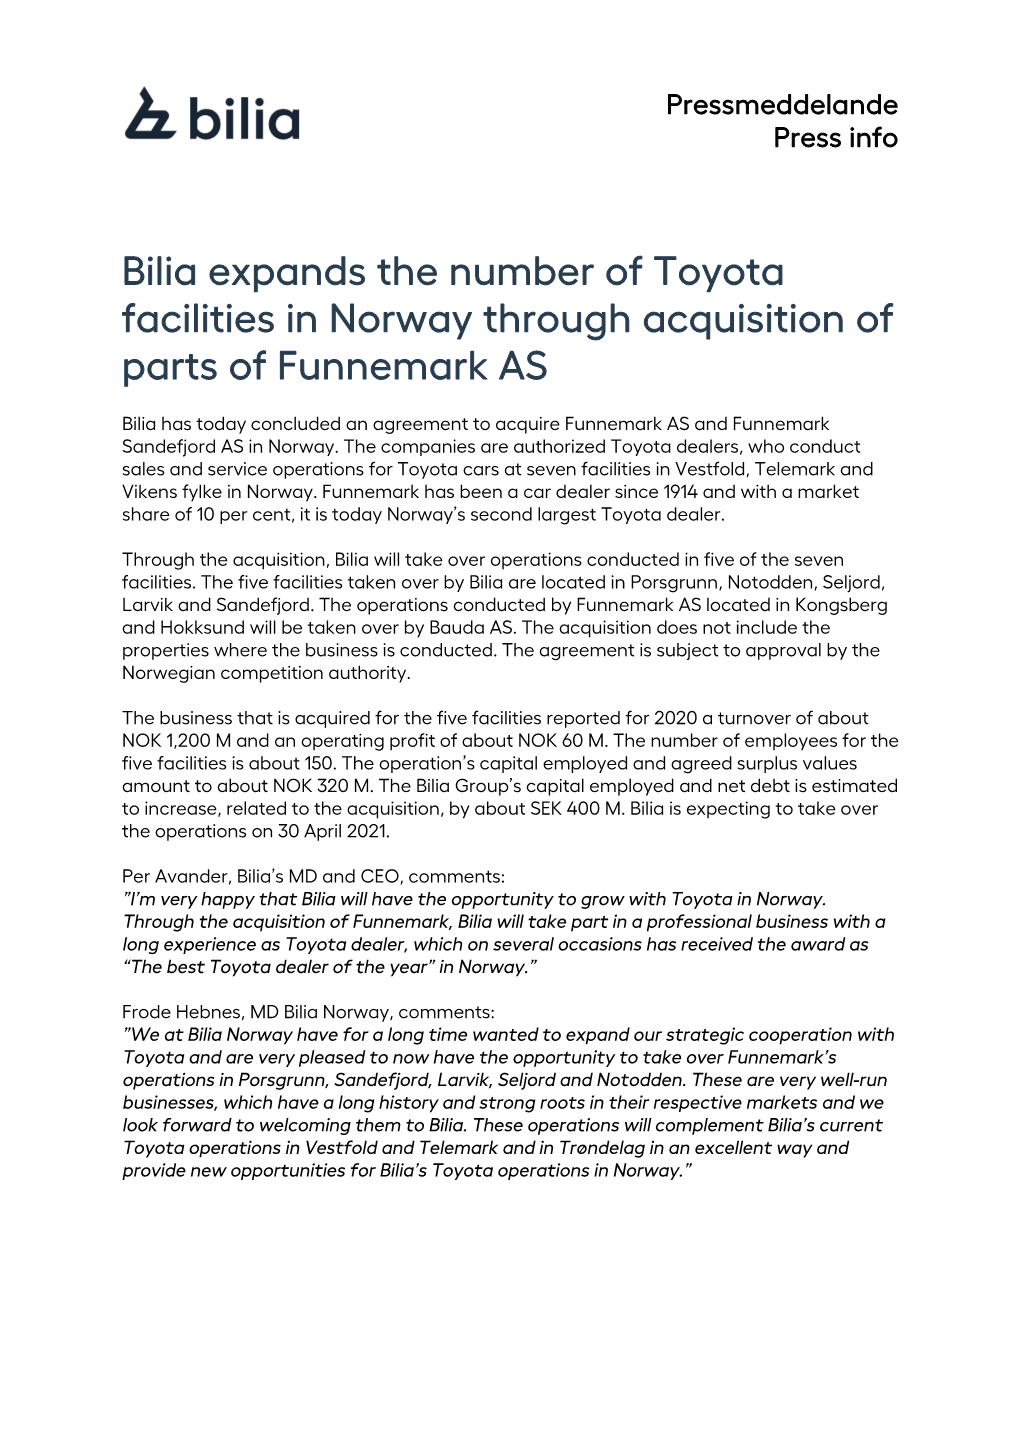 Bilia Expands the Number of Toyota Facilities in Norway Through Acquisition of Parts of Funnemark AS